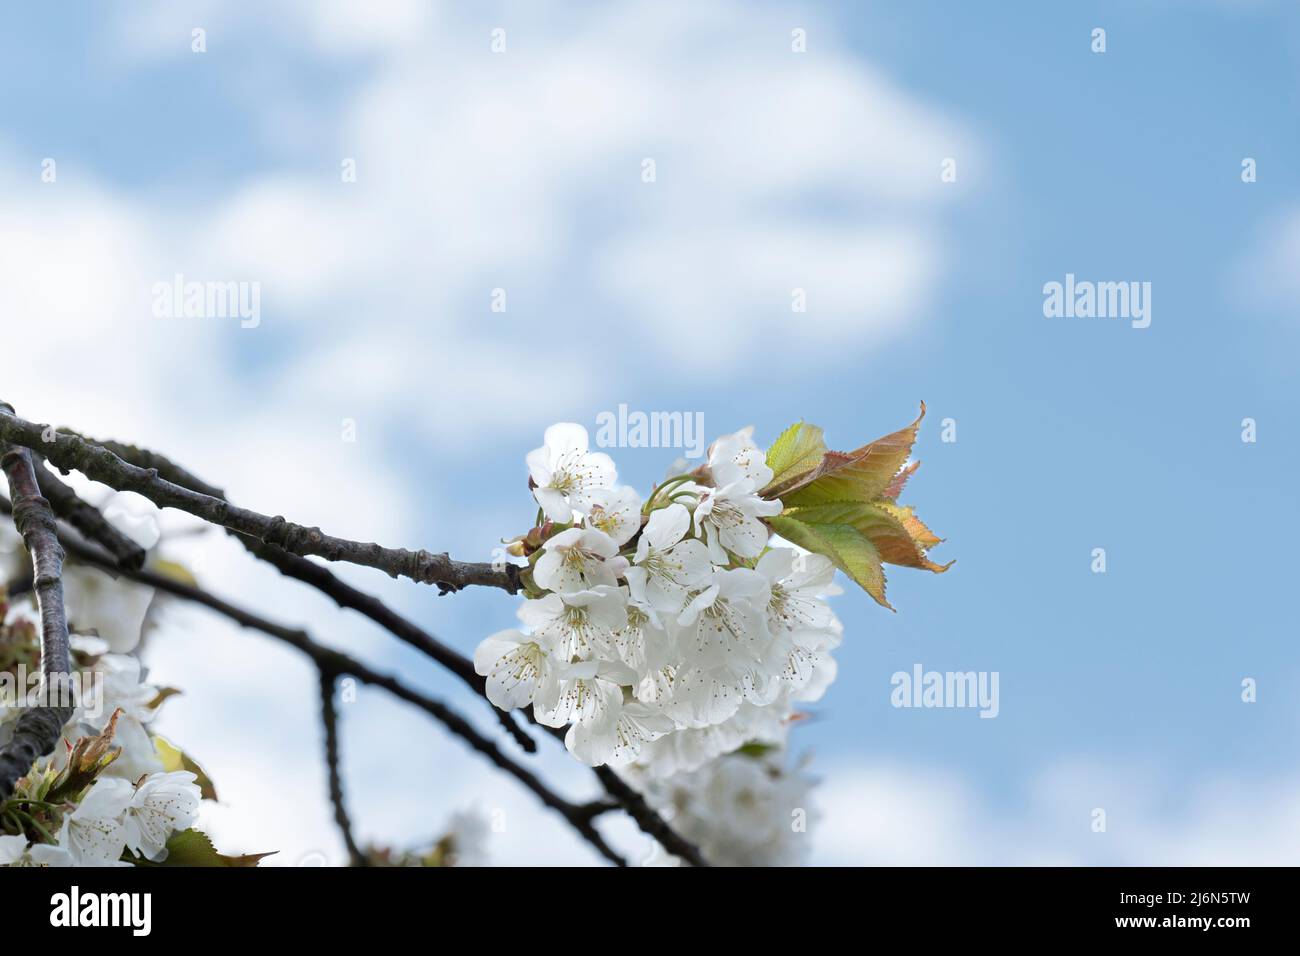 Close-up of a white blooming cherry branch in front of blue sky with clouds Stock Photo